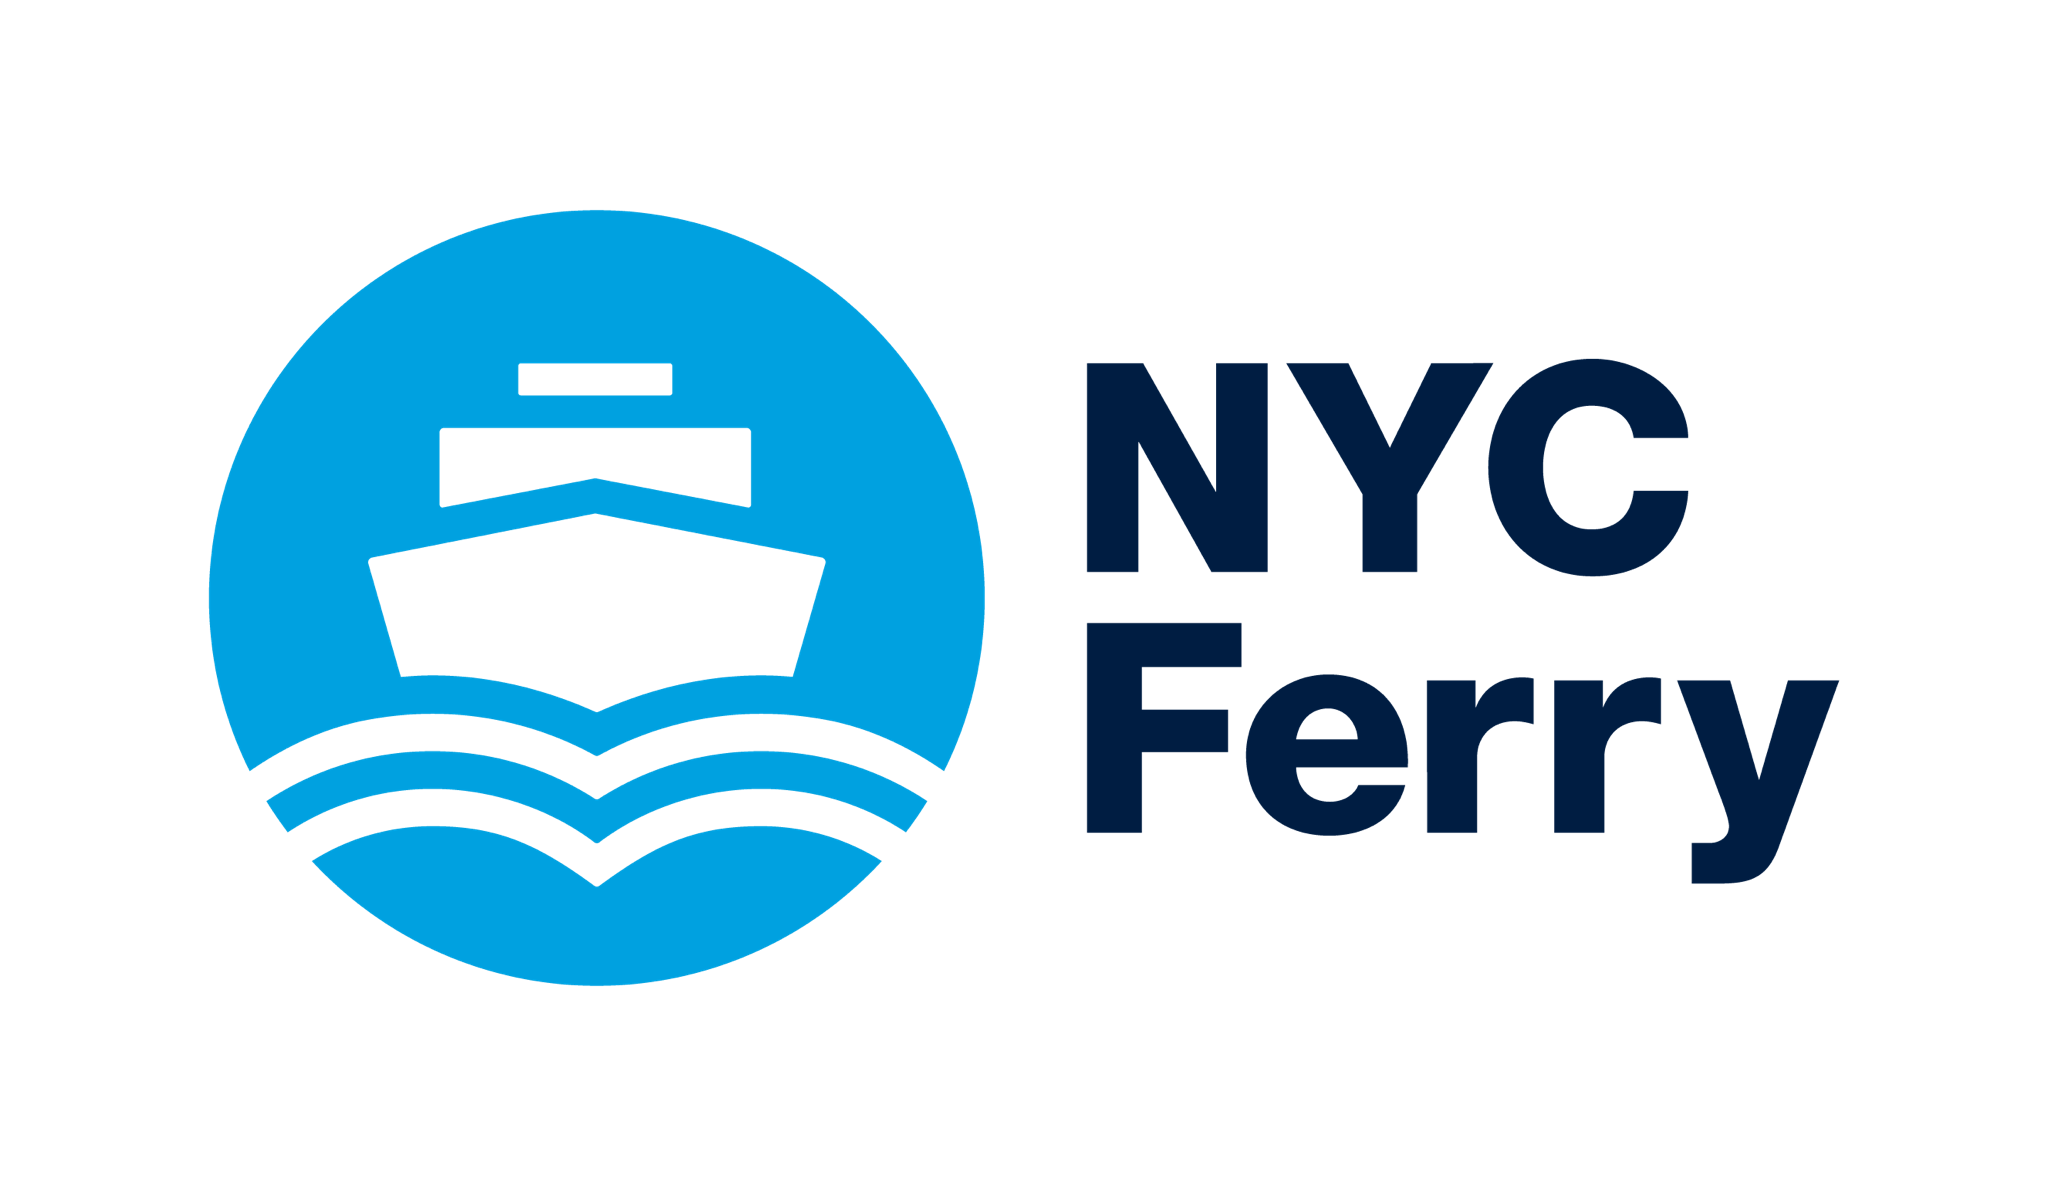 NYCFerry_.png